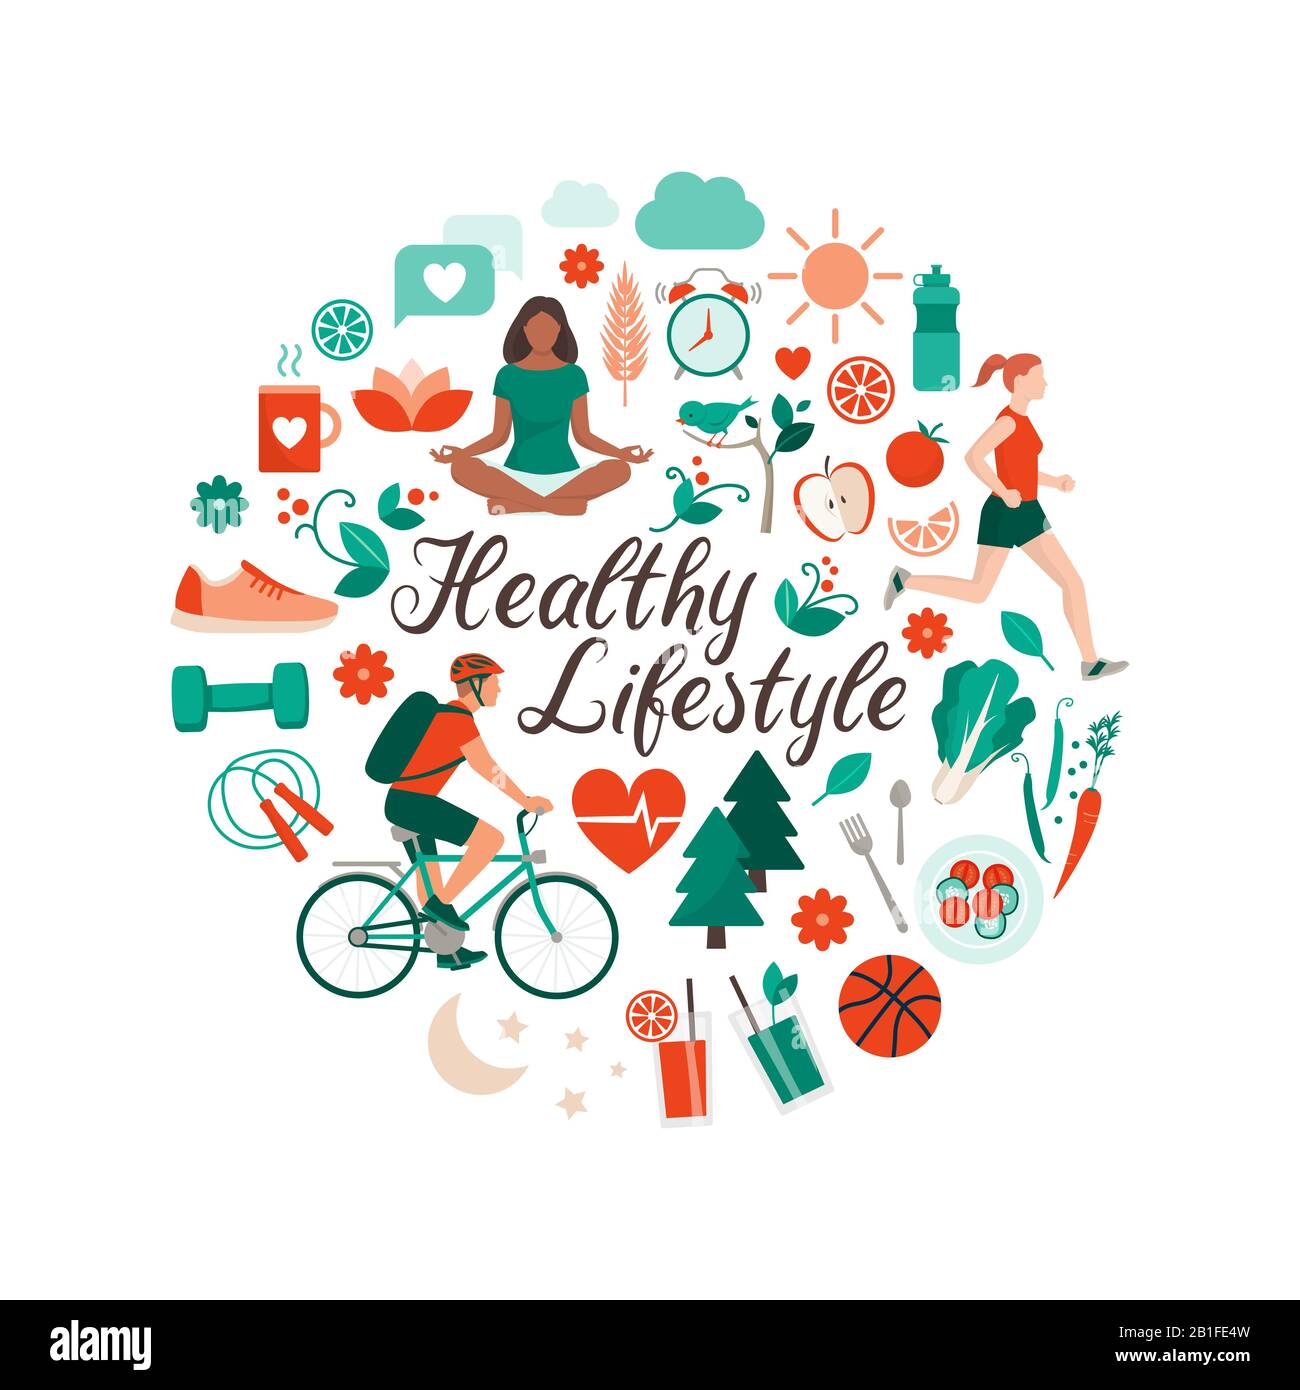 Healthy lifestyle and self-care concept with food, sports and nature icons arranged in a circular shape Stock Vector